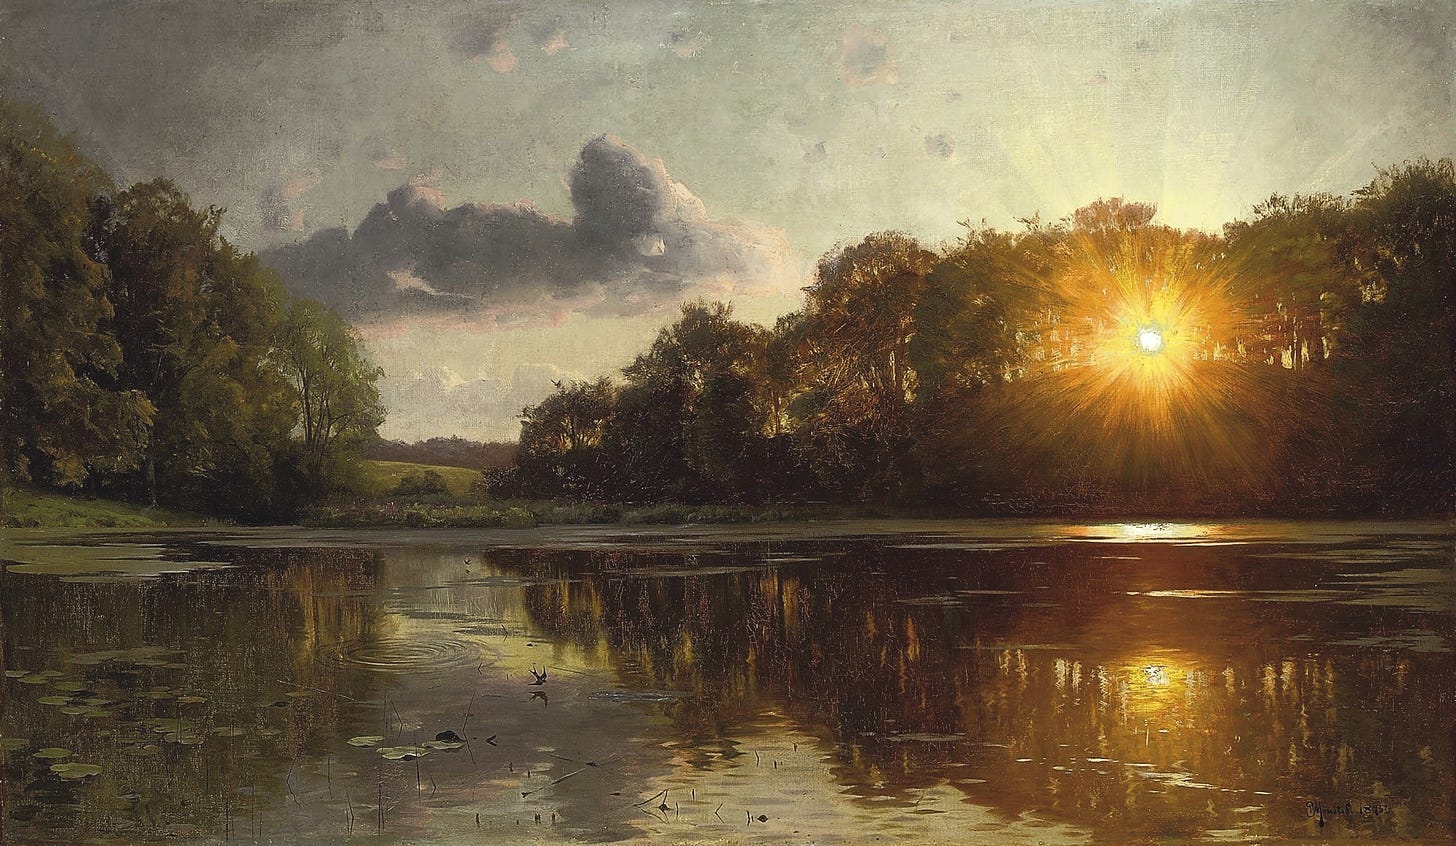 File:Peder Mønsted - Sunset over a forest lake.jpg - Wikimedia Commons